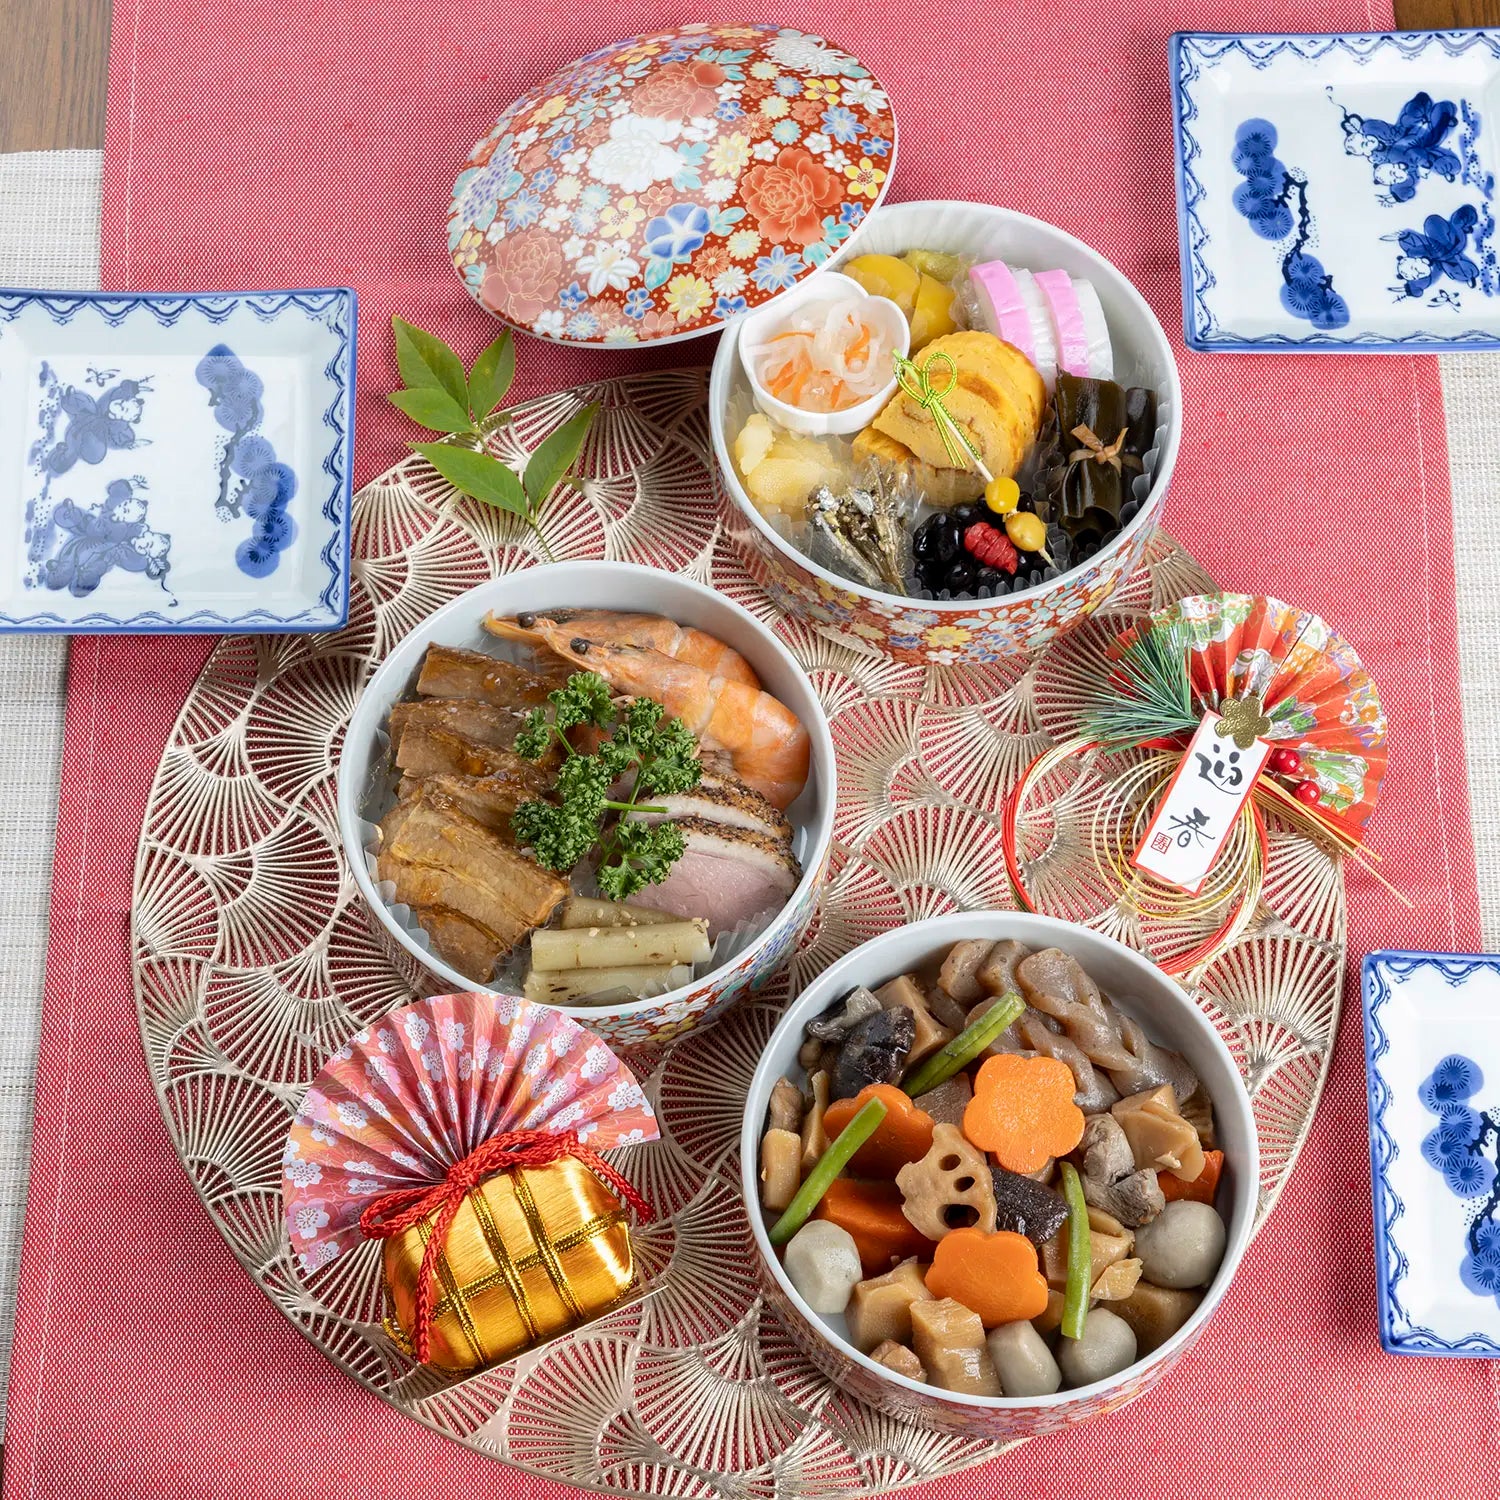 Some foods included in osechi